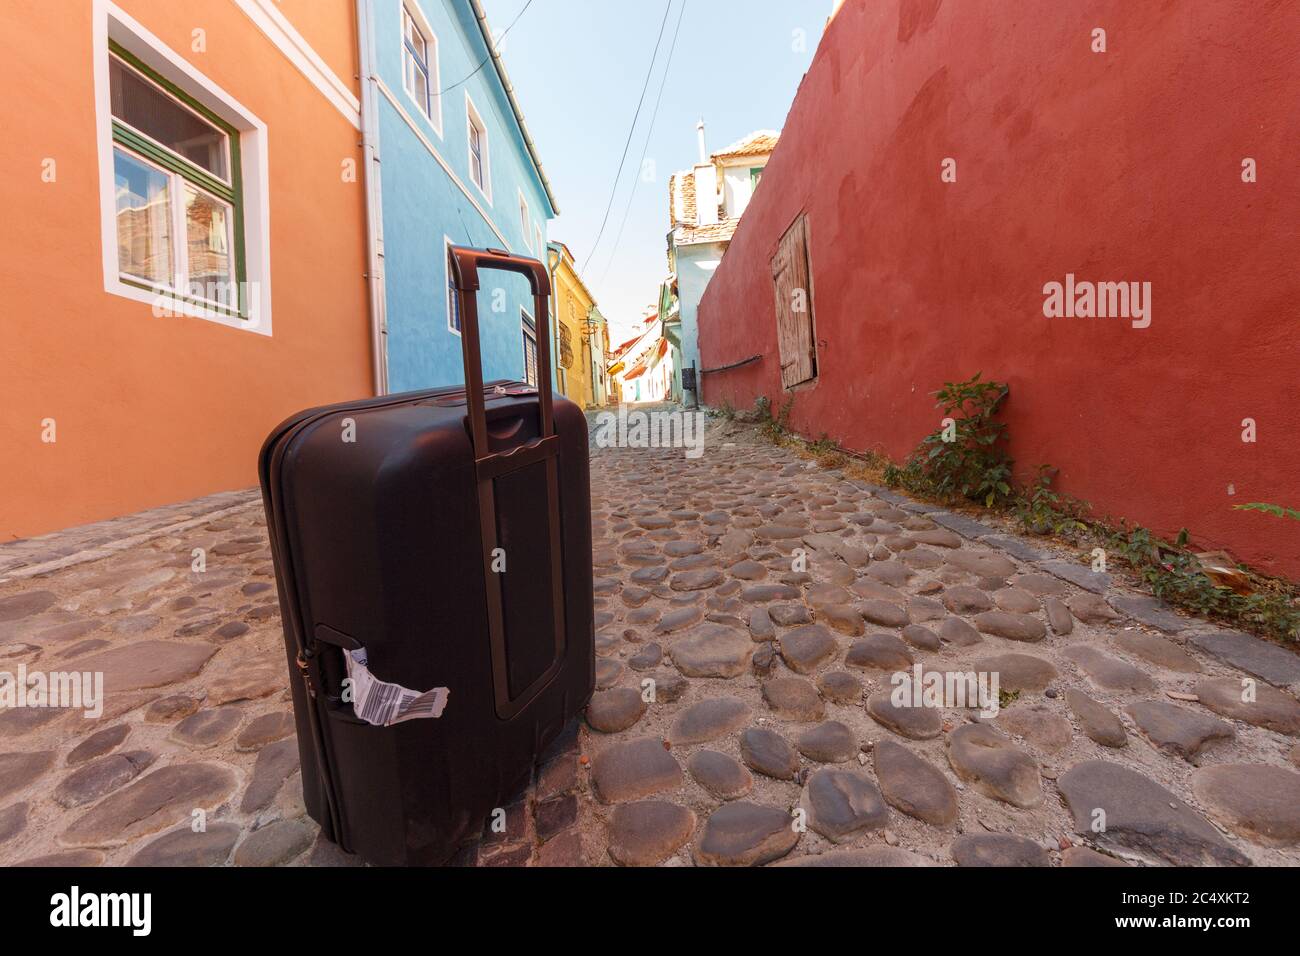 Black troler suitcase on an empty medieval city street. Colorful buildings and stone paved street with blue sky. Travel concept. Stock Photo